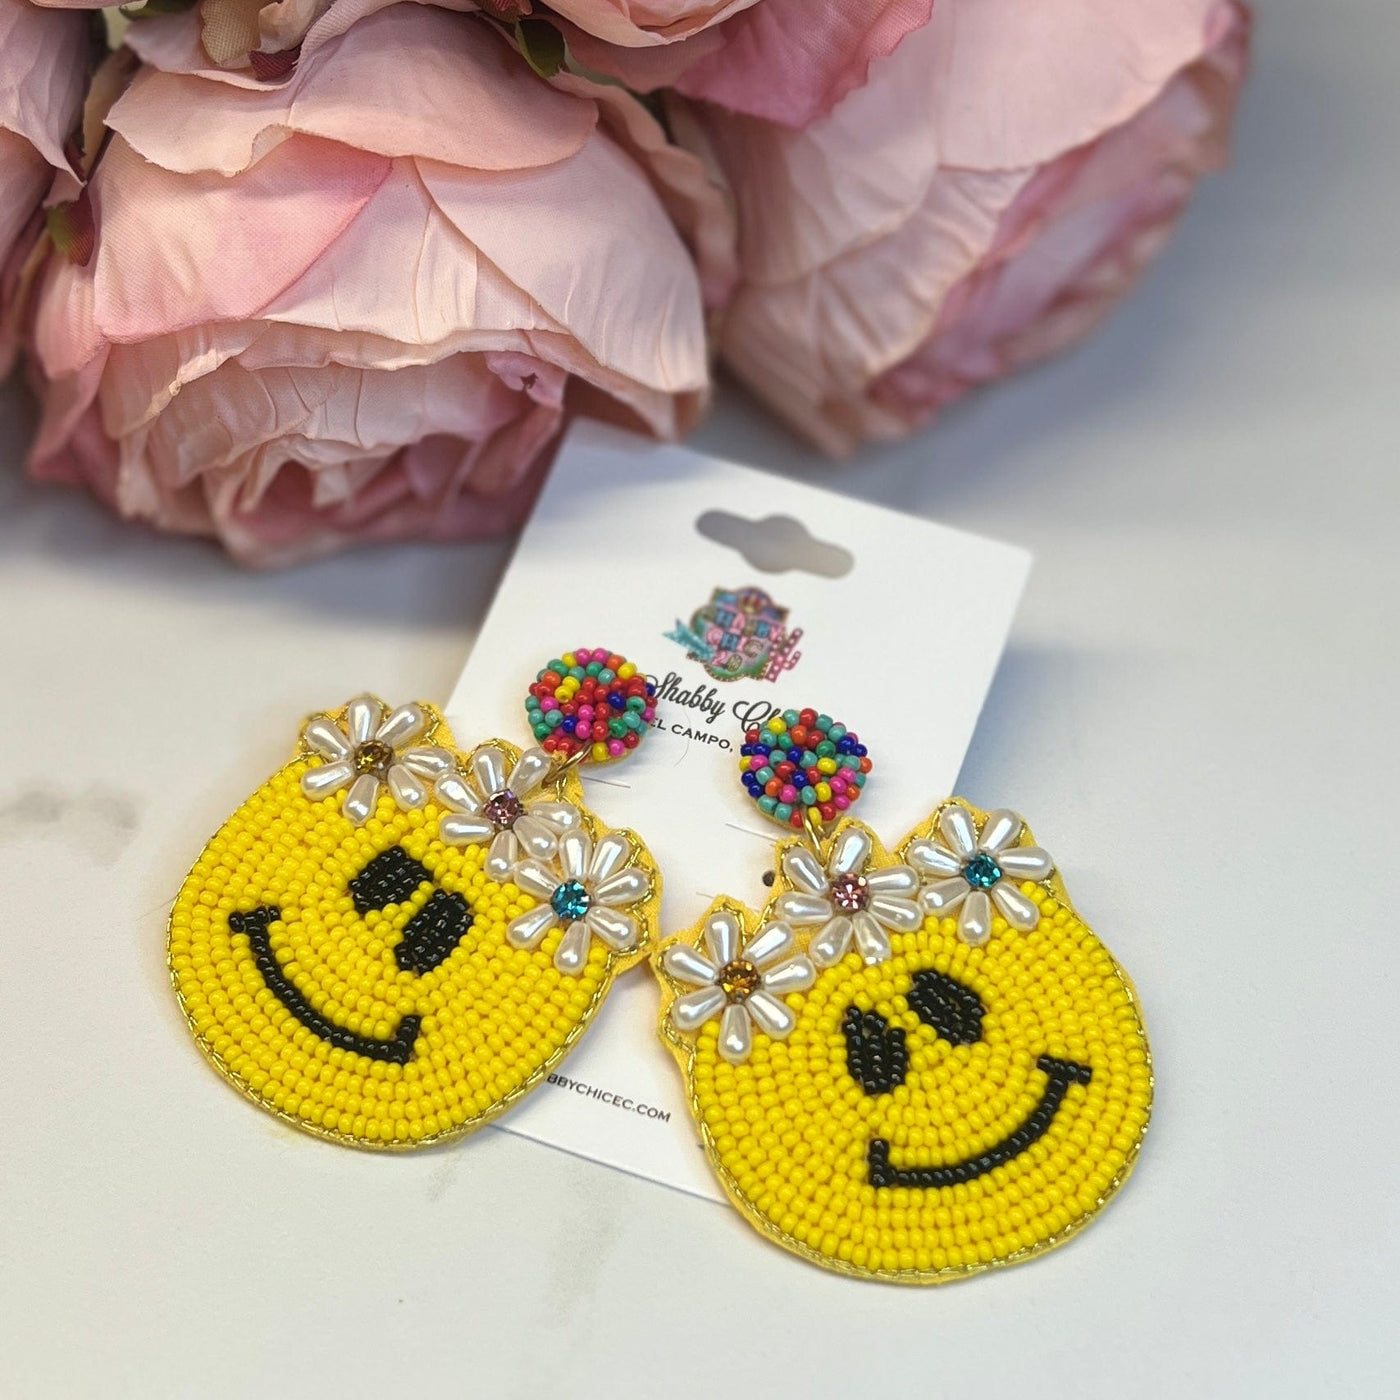 Beaded Happy Times Earrings Shabby Chic Boutique and Tanning Salon